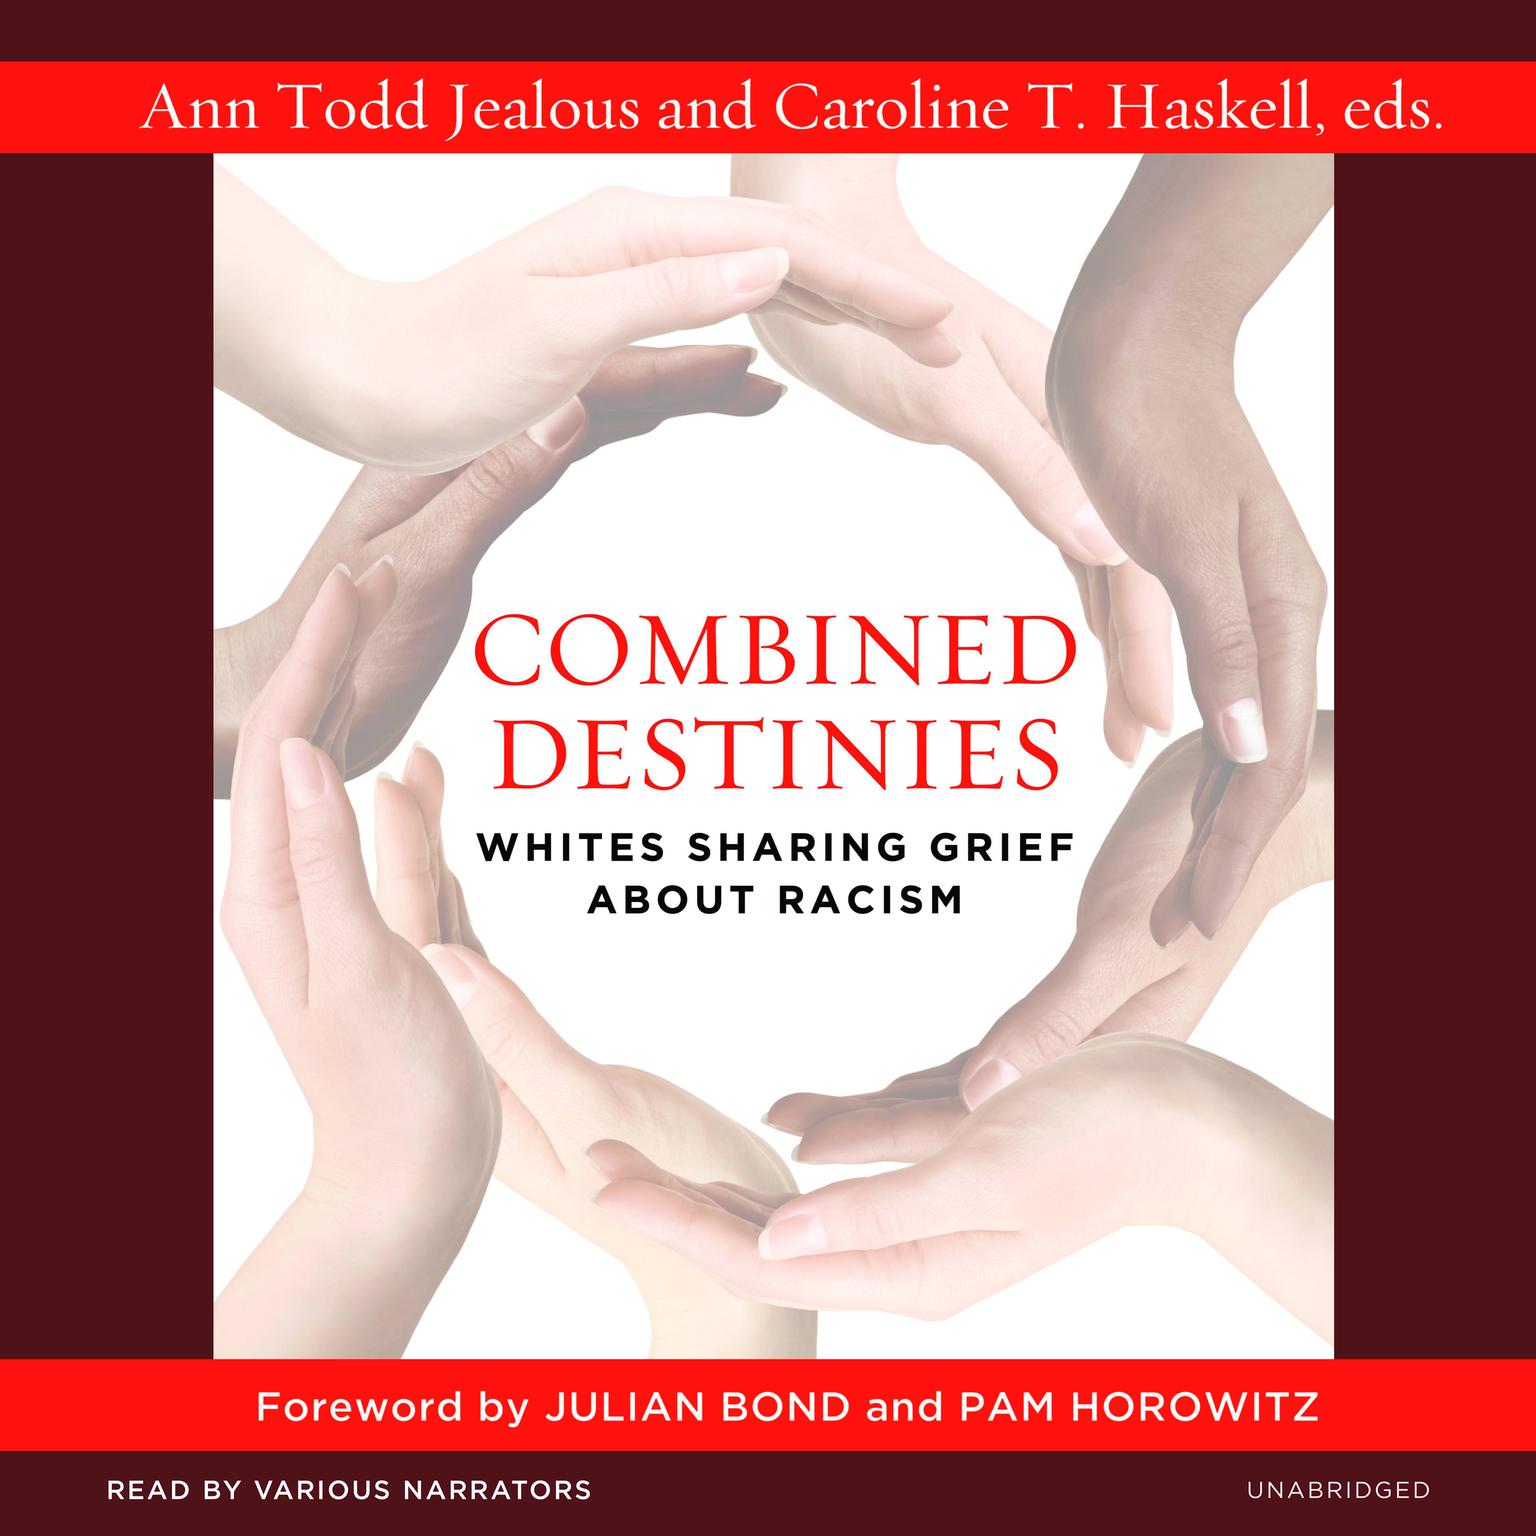 Combined Destinies: Whites Sharing Grief About Racism Audiobook, by Ann Todd Jealous